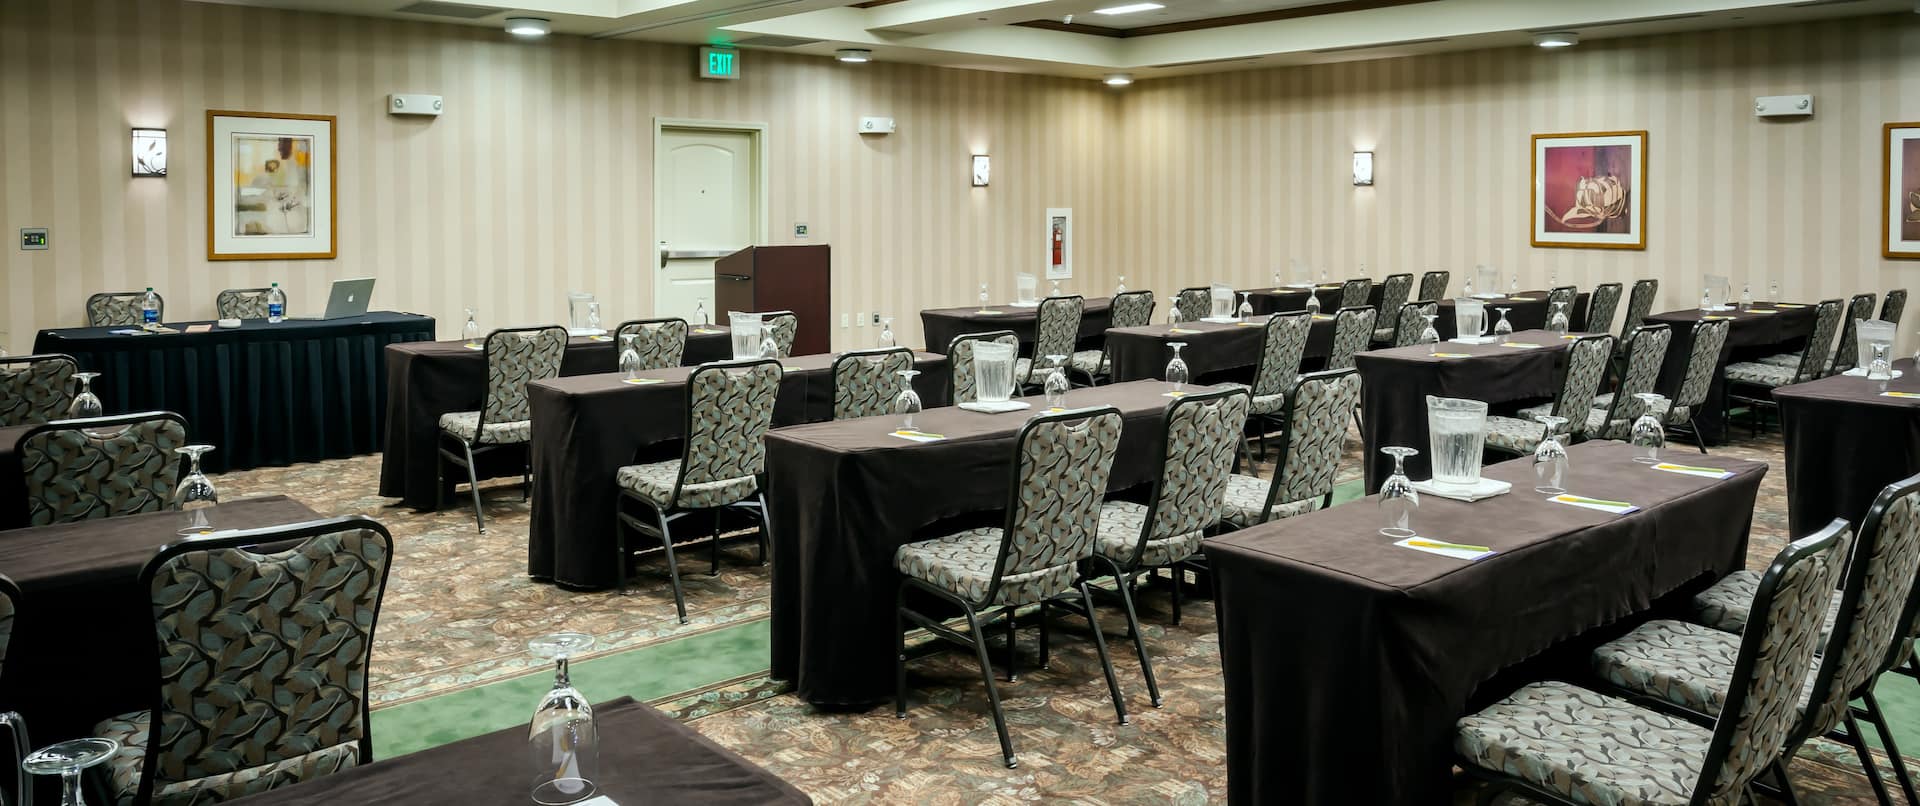 Classroom Setup in Meeting Room With Tables and Chairs Facing Speaker's Table With Laptop, Two Chairs, and Podium